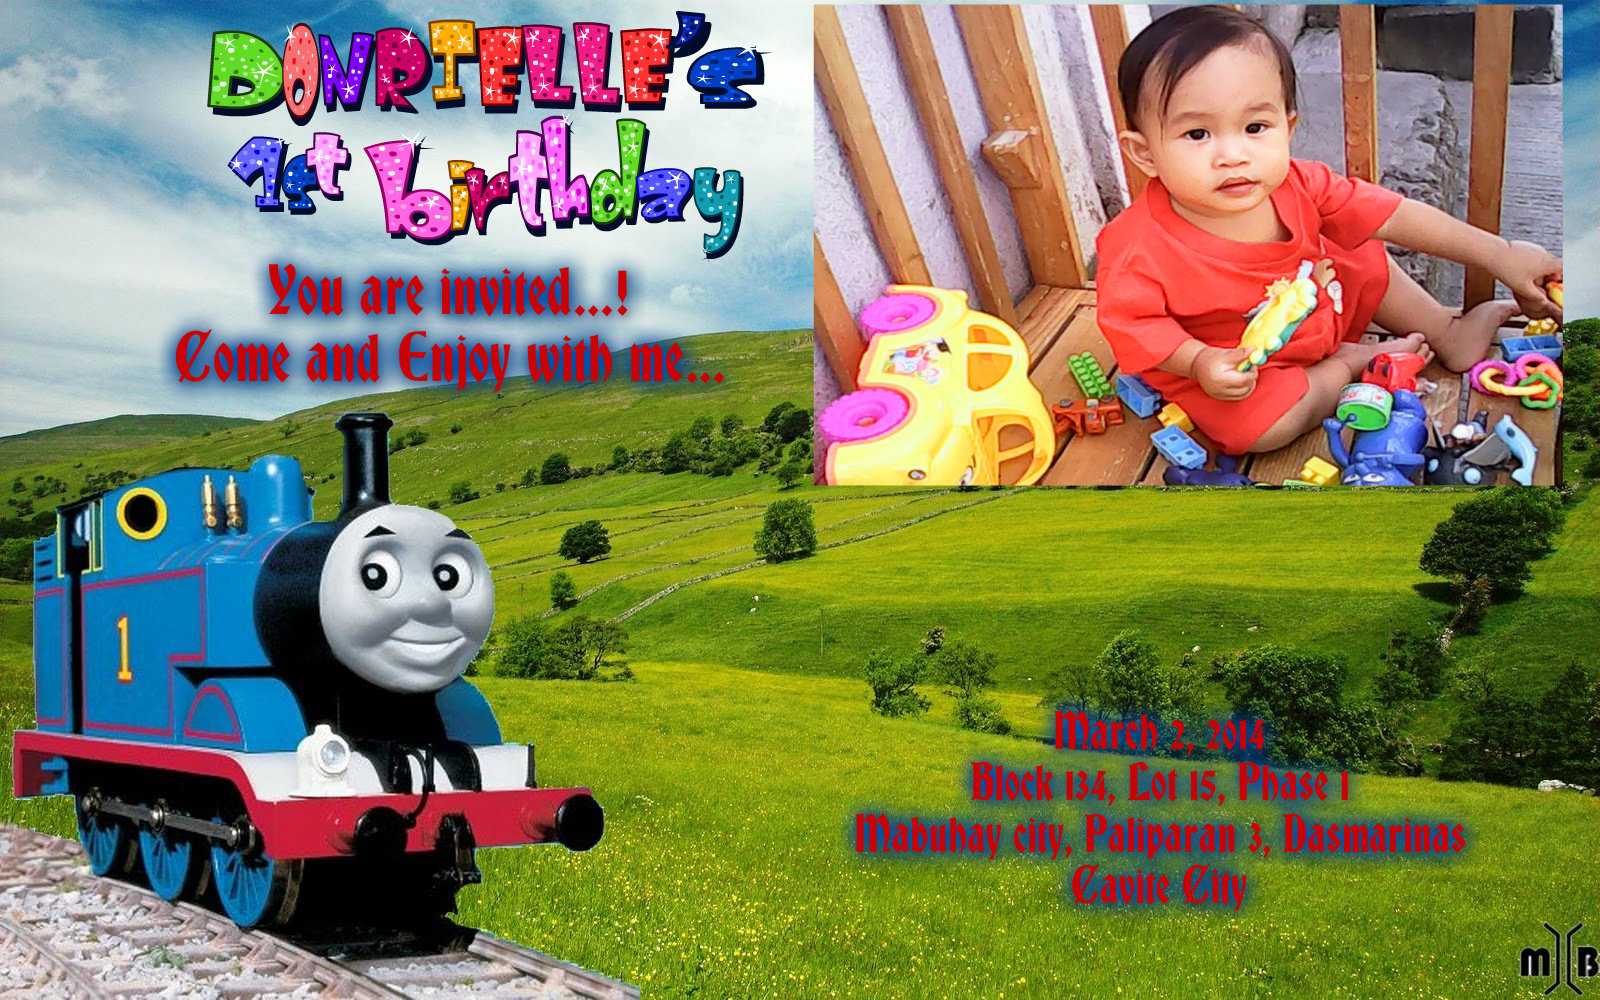 Thomas And Friends images donels birthday HD wallpaper and